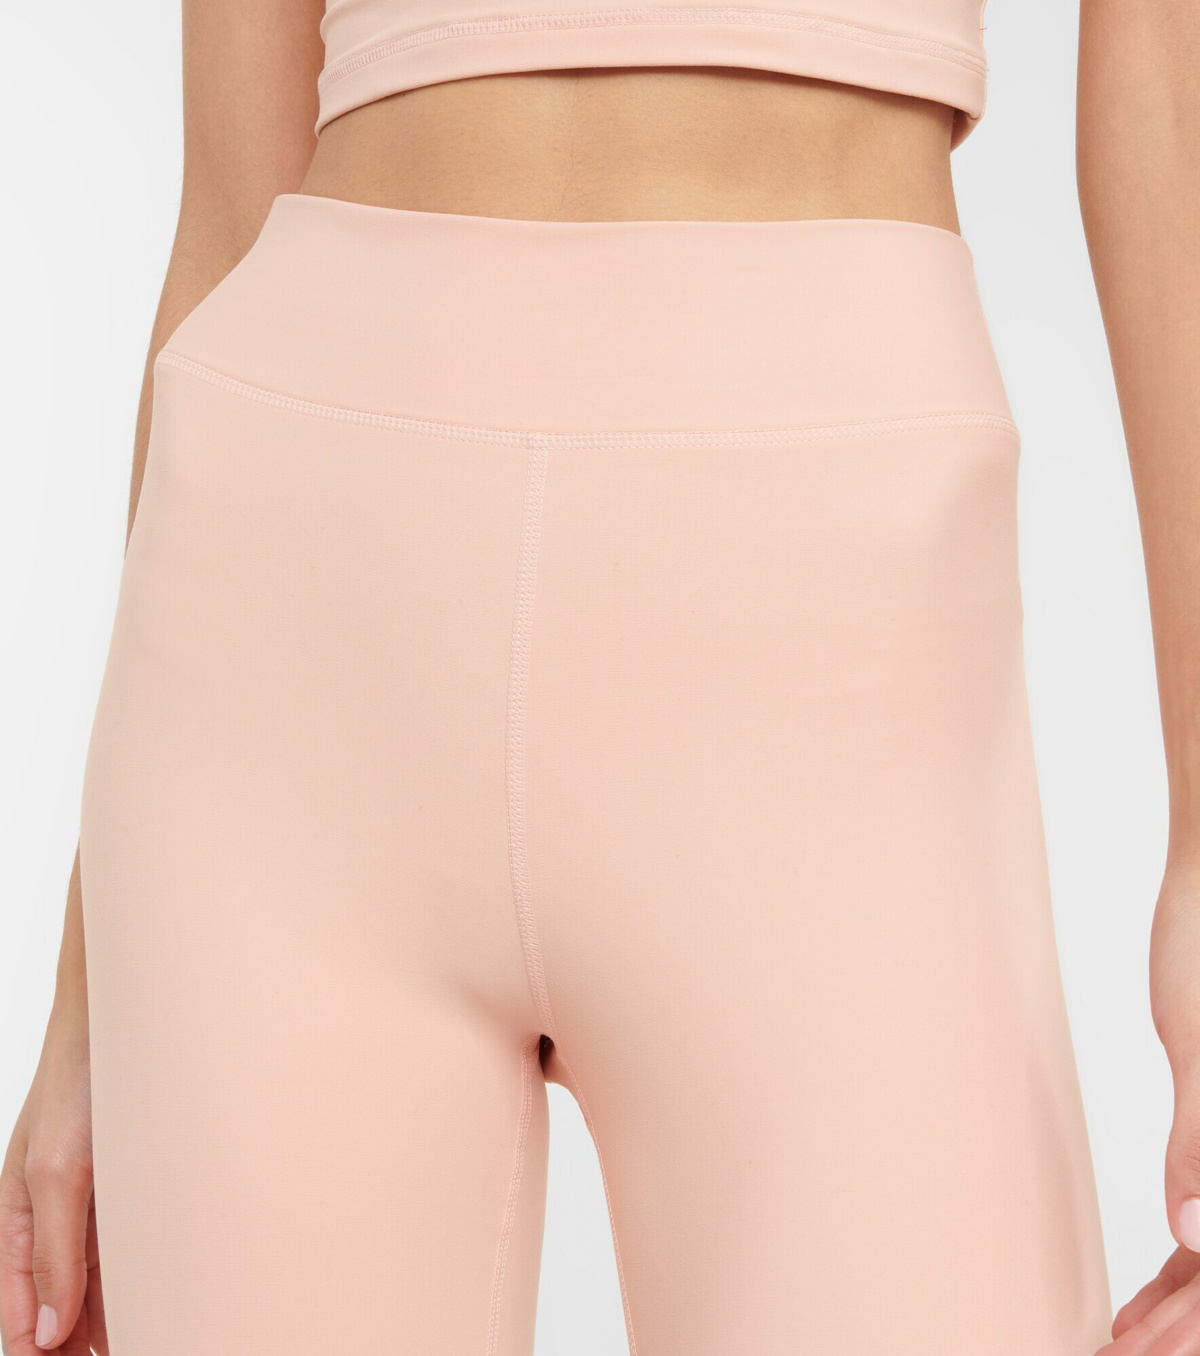 The Upside Peached leggings The Upside